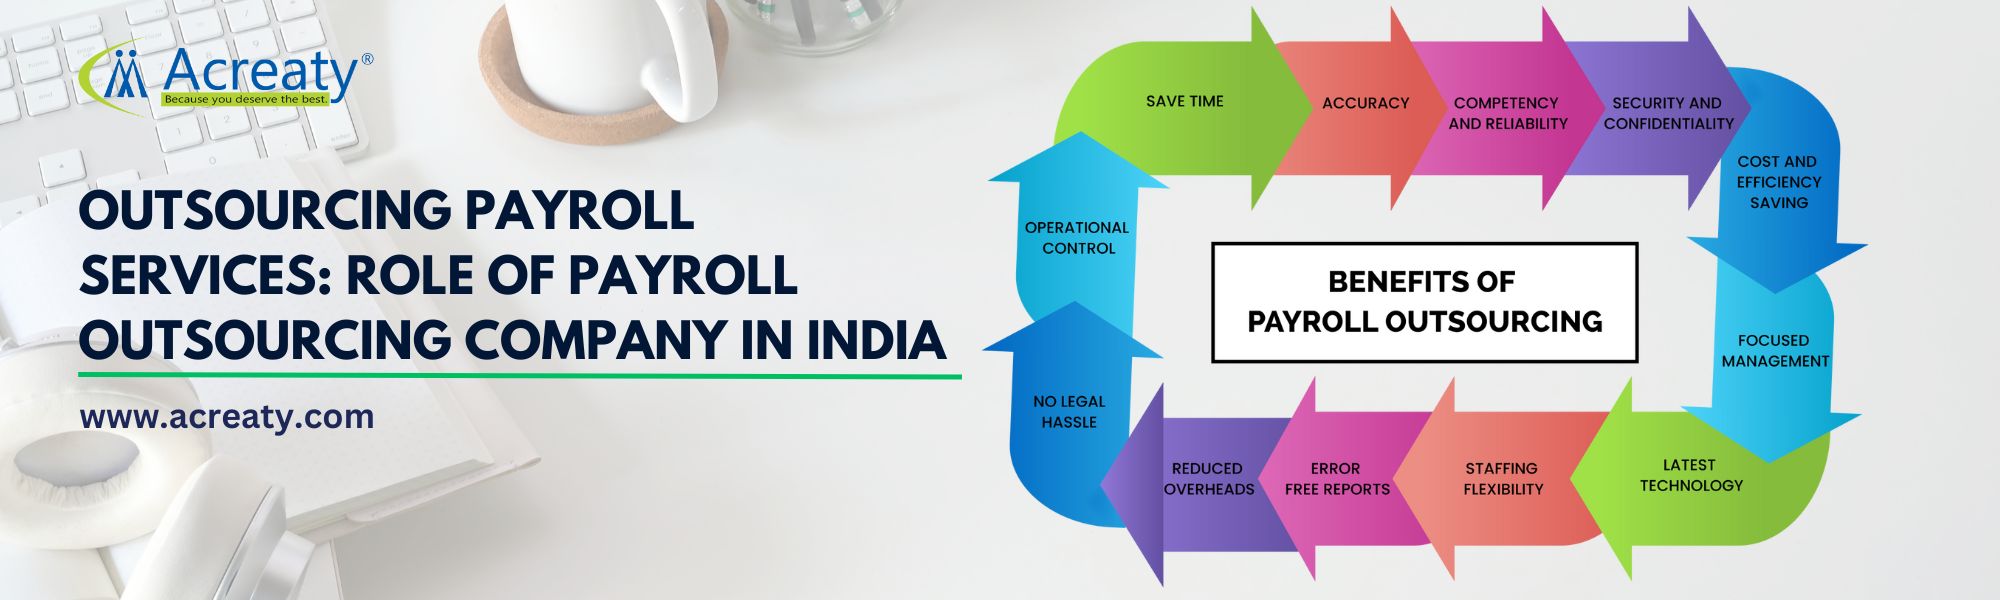 Outsourcing Payroll Services: Role of Payroll Outsourcing Company in India